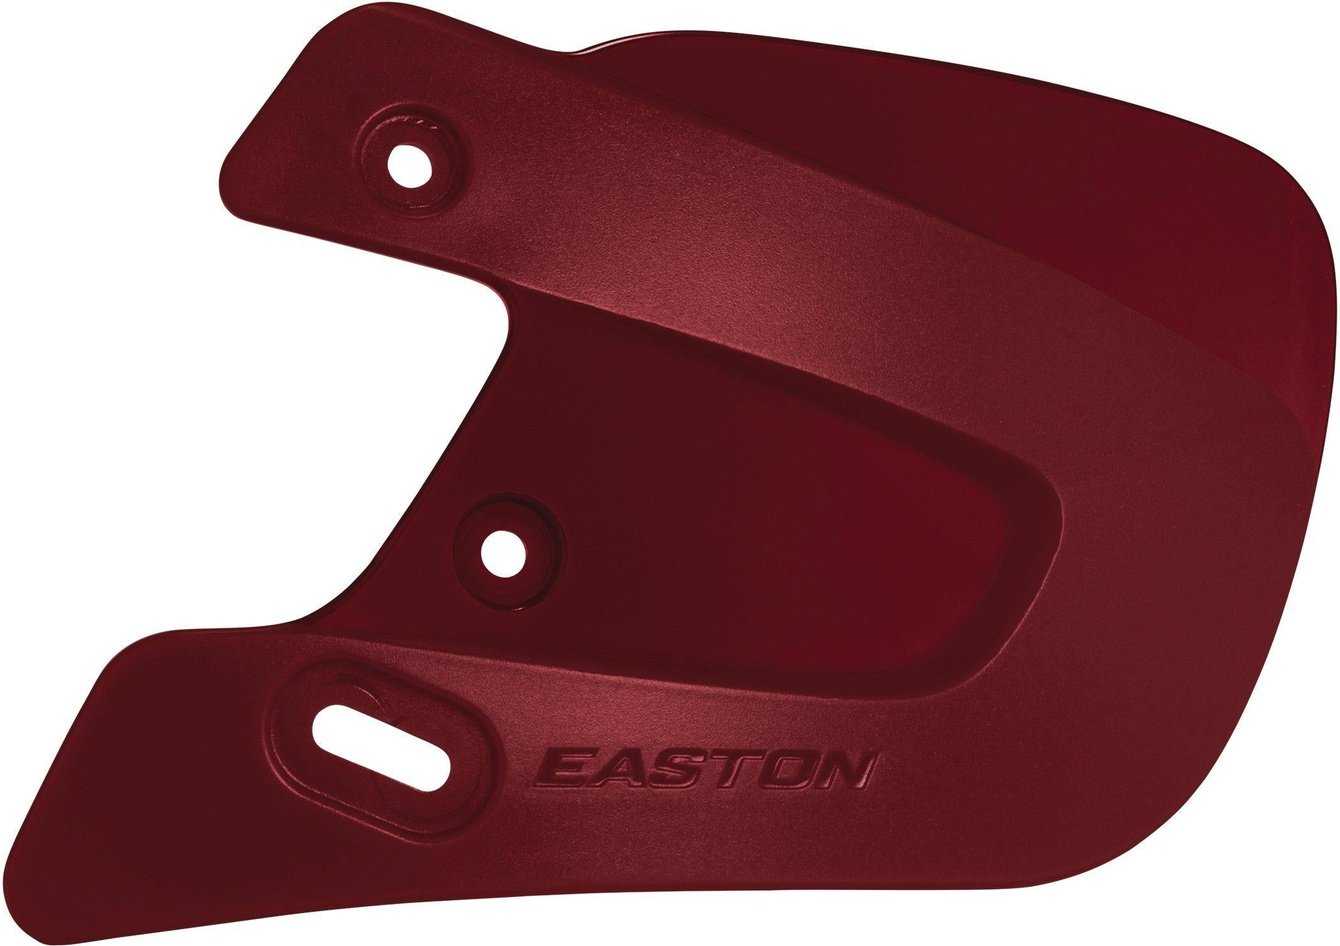 Easton Helmet Extended Jaw Guard - Maroon - HIT a Double